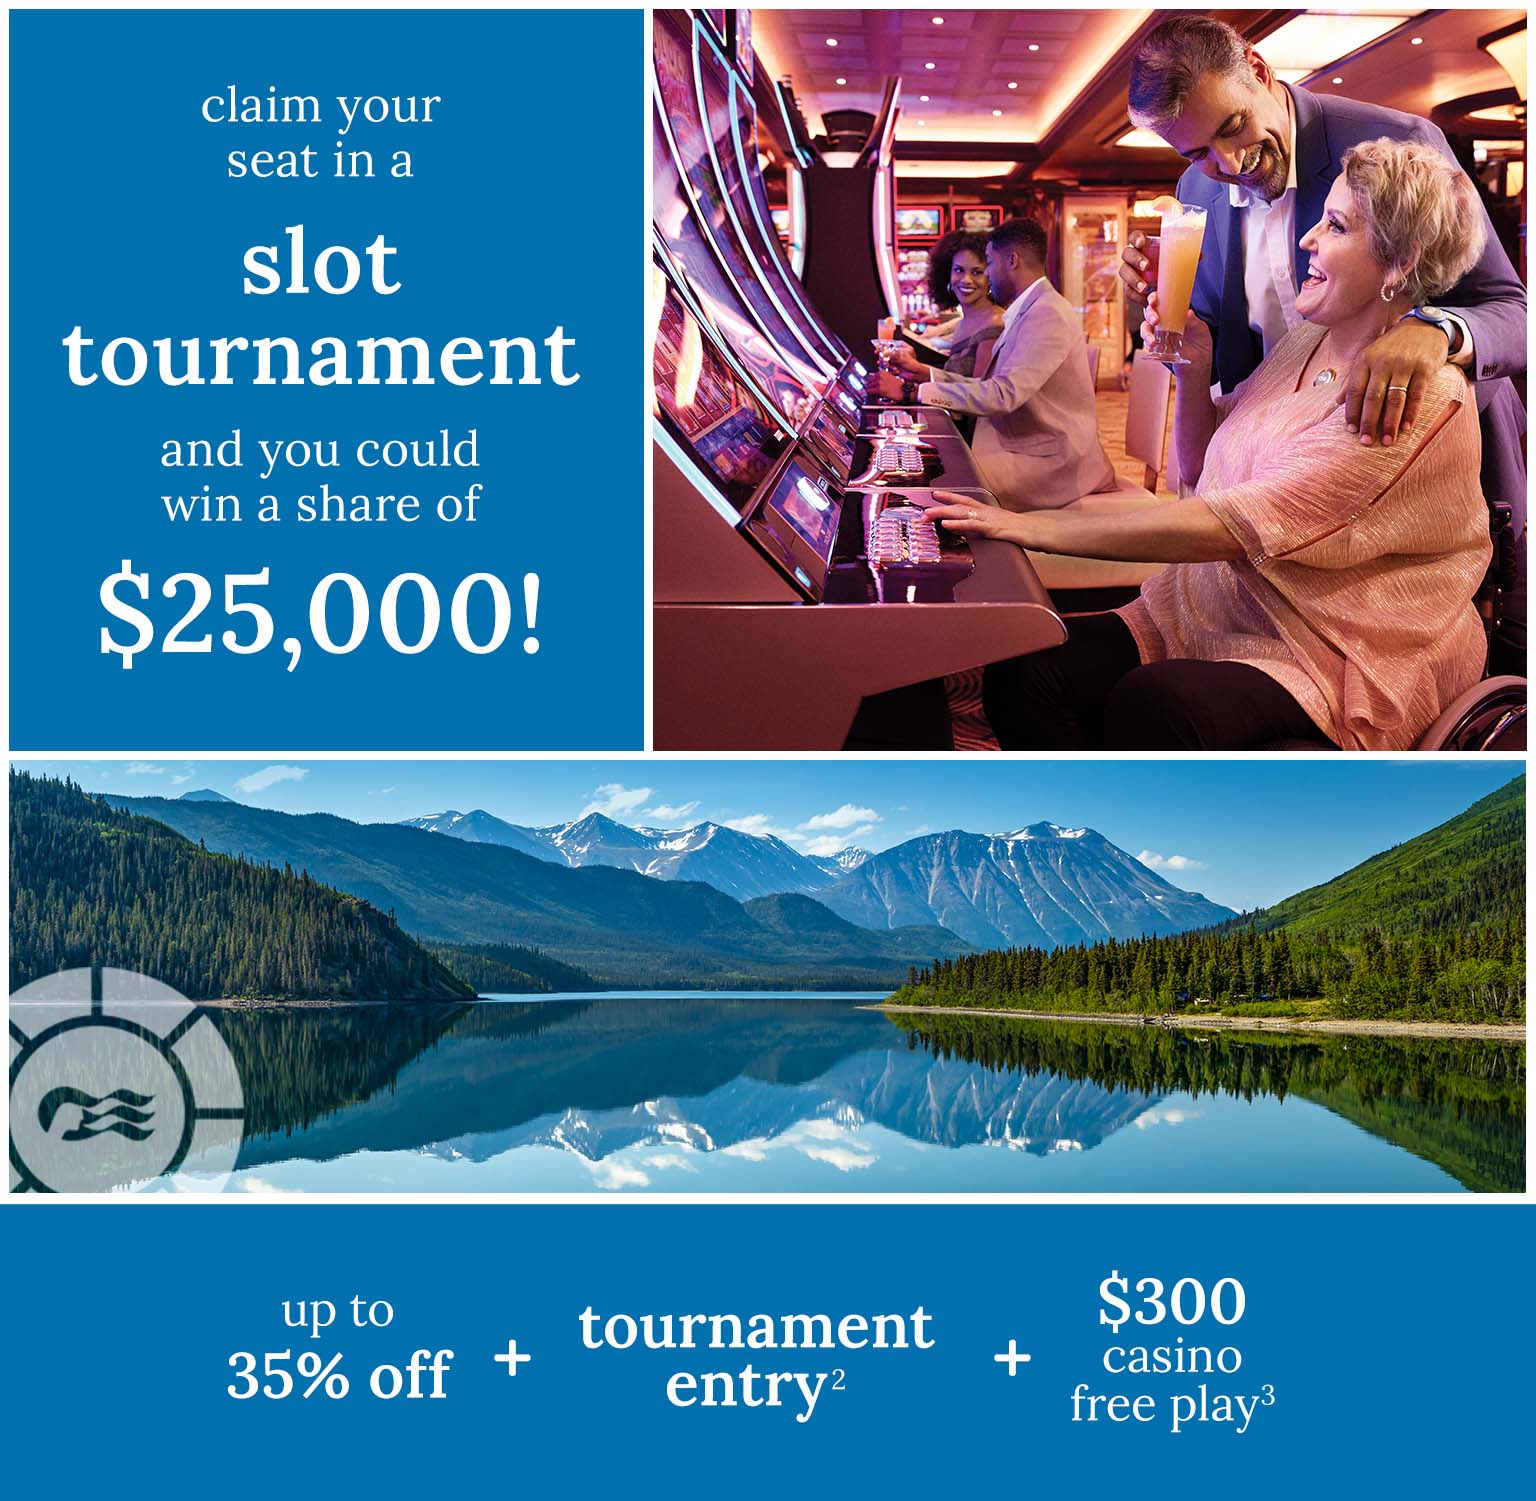 Claim your seat in a slot tournament and you could win a share of $25,000 - up to 35% off + tournament entry(2) + $300 casino free play(3)